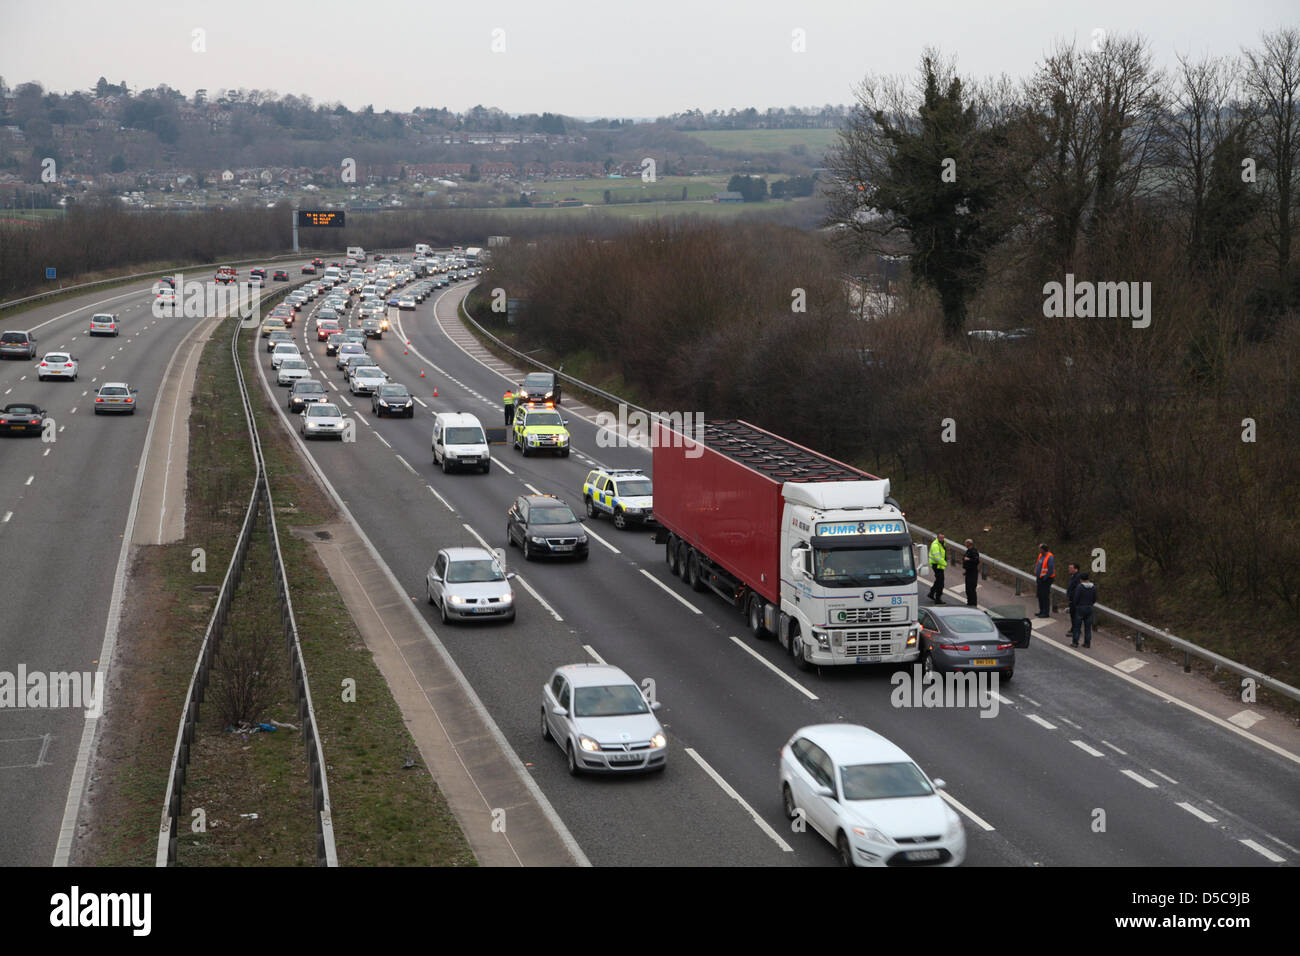 Winchester,UK. 28 March 2013 - Police & highway patrol attending an incident on the M3 motorway between Jct. 10 & 11 in Hampshire involving an articulated lorry and a Renault Laguna. Nobody appeared to be injured but the incident caused tailbacks for an hour. Stock Photo